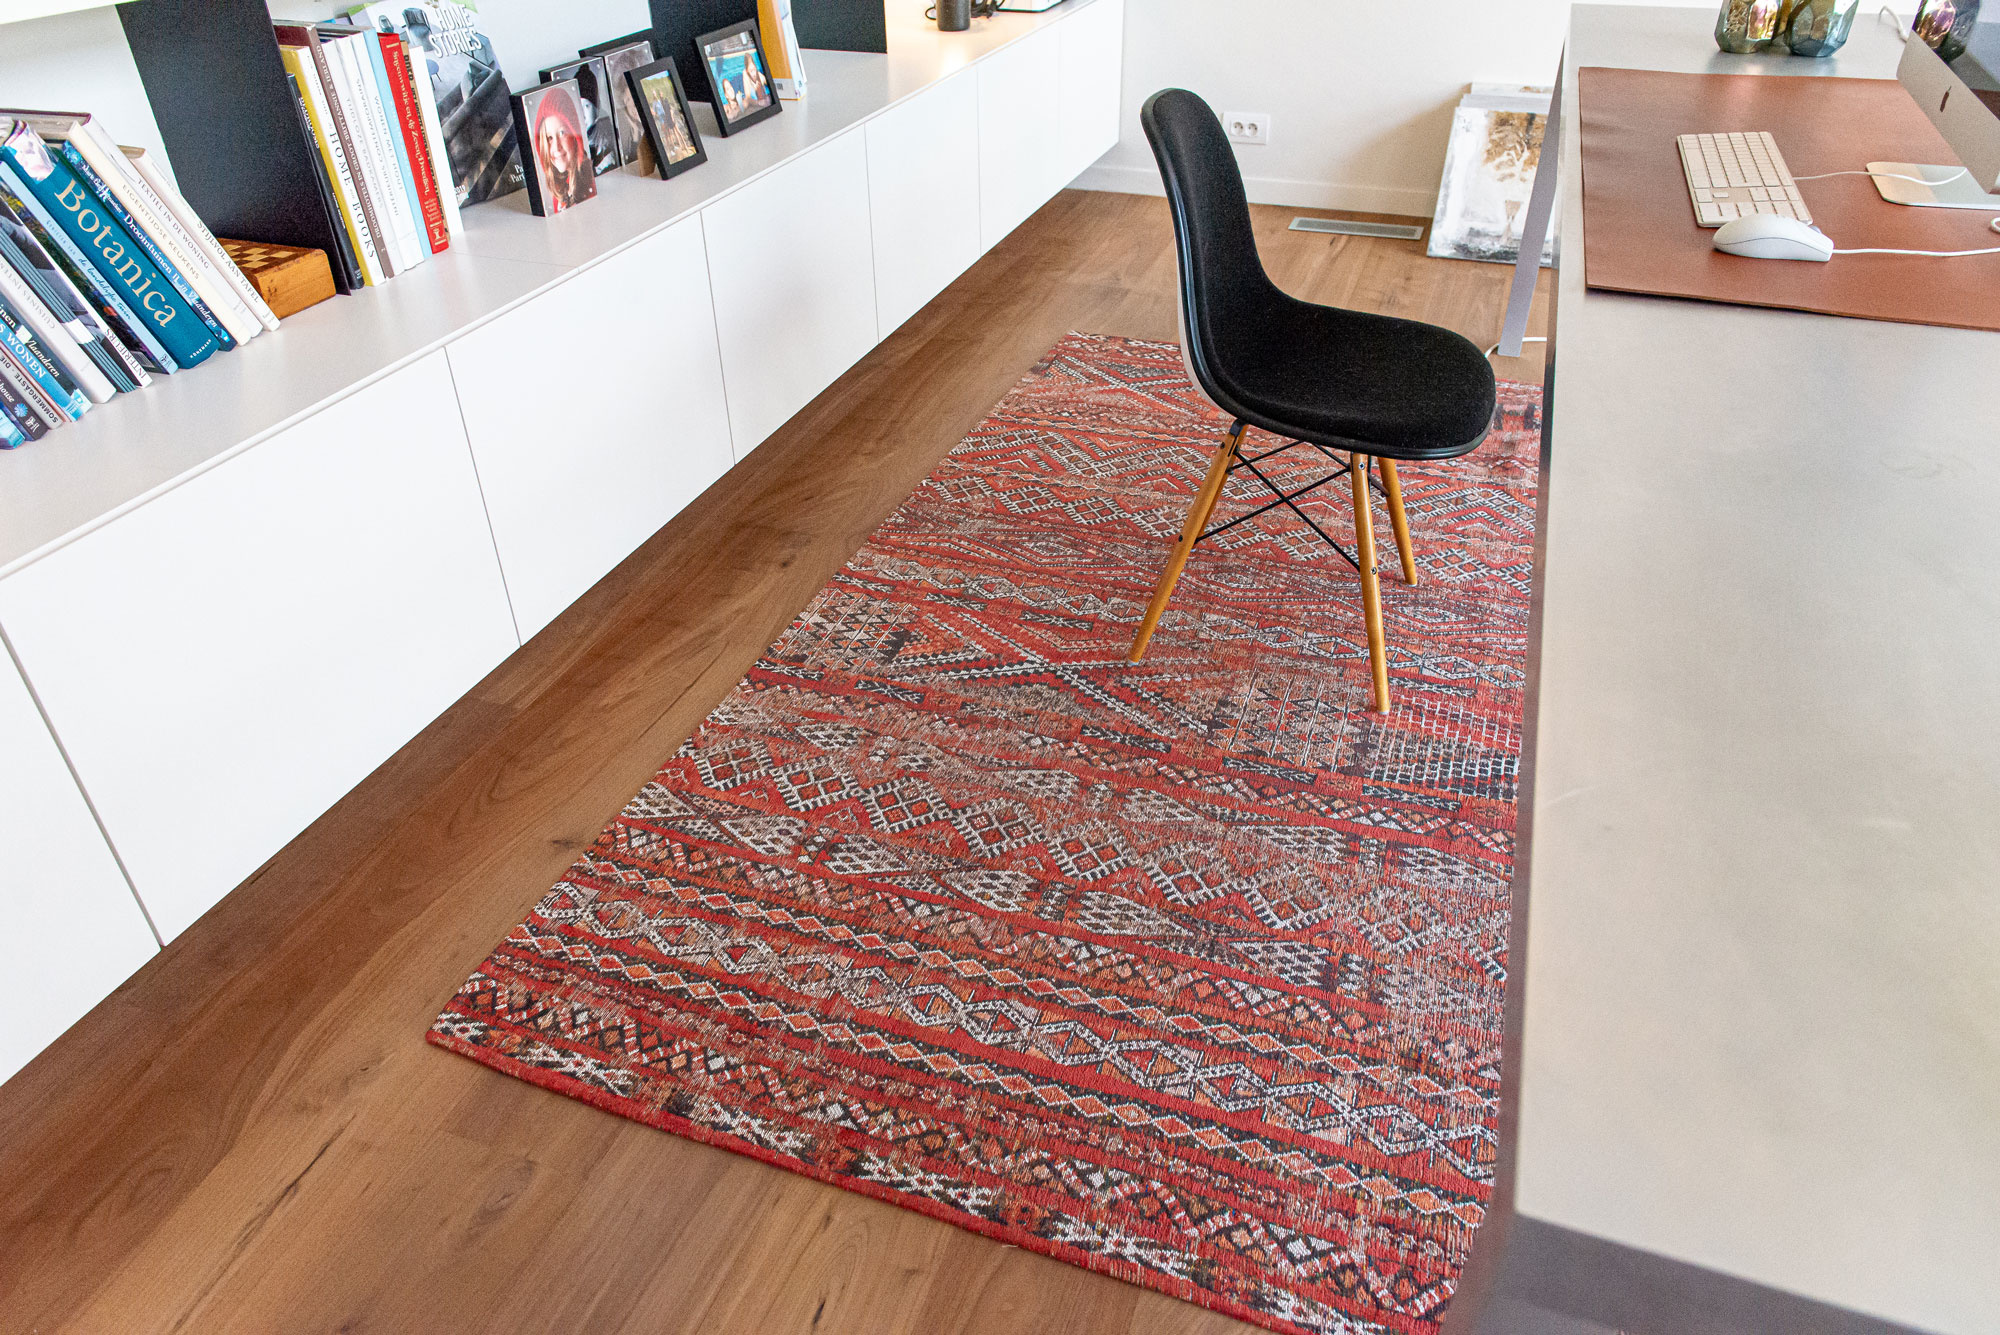 Fez Red 9115 Rug ☞ Size: 240 x 340 cm